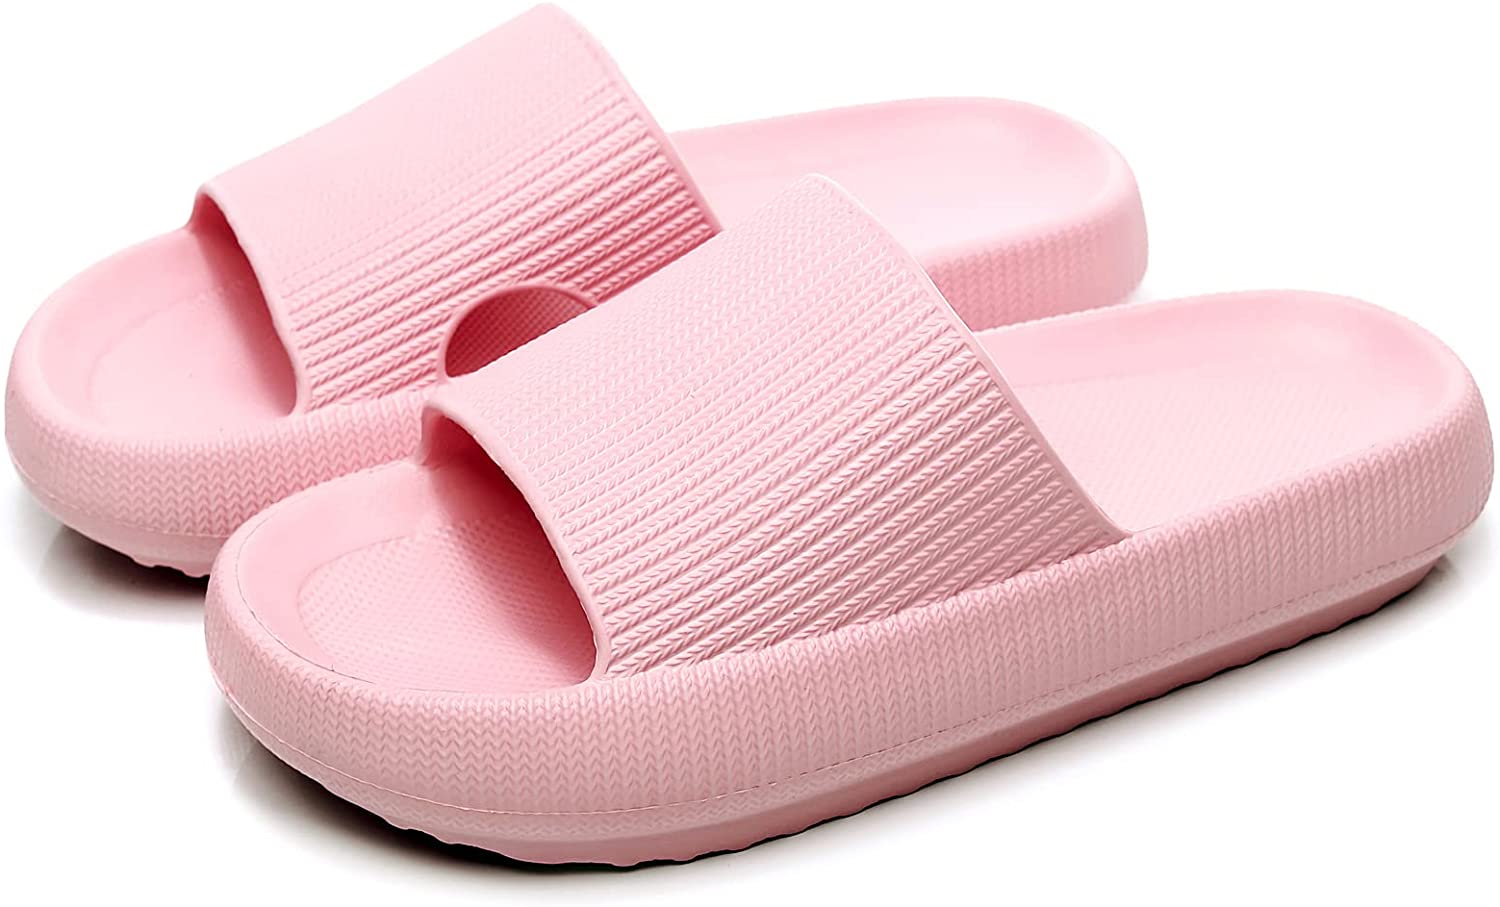 Pillow Slides™ - Women's - Pink - 2399 requests